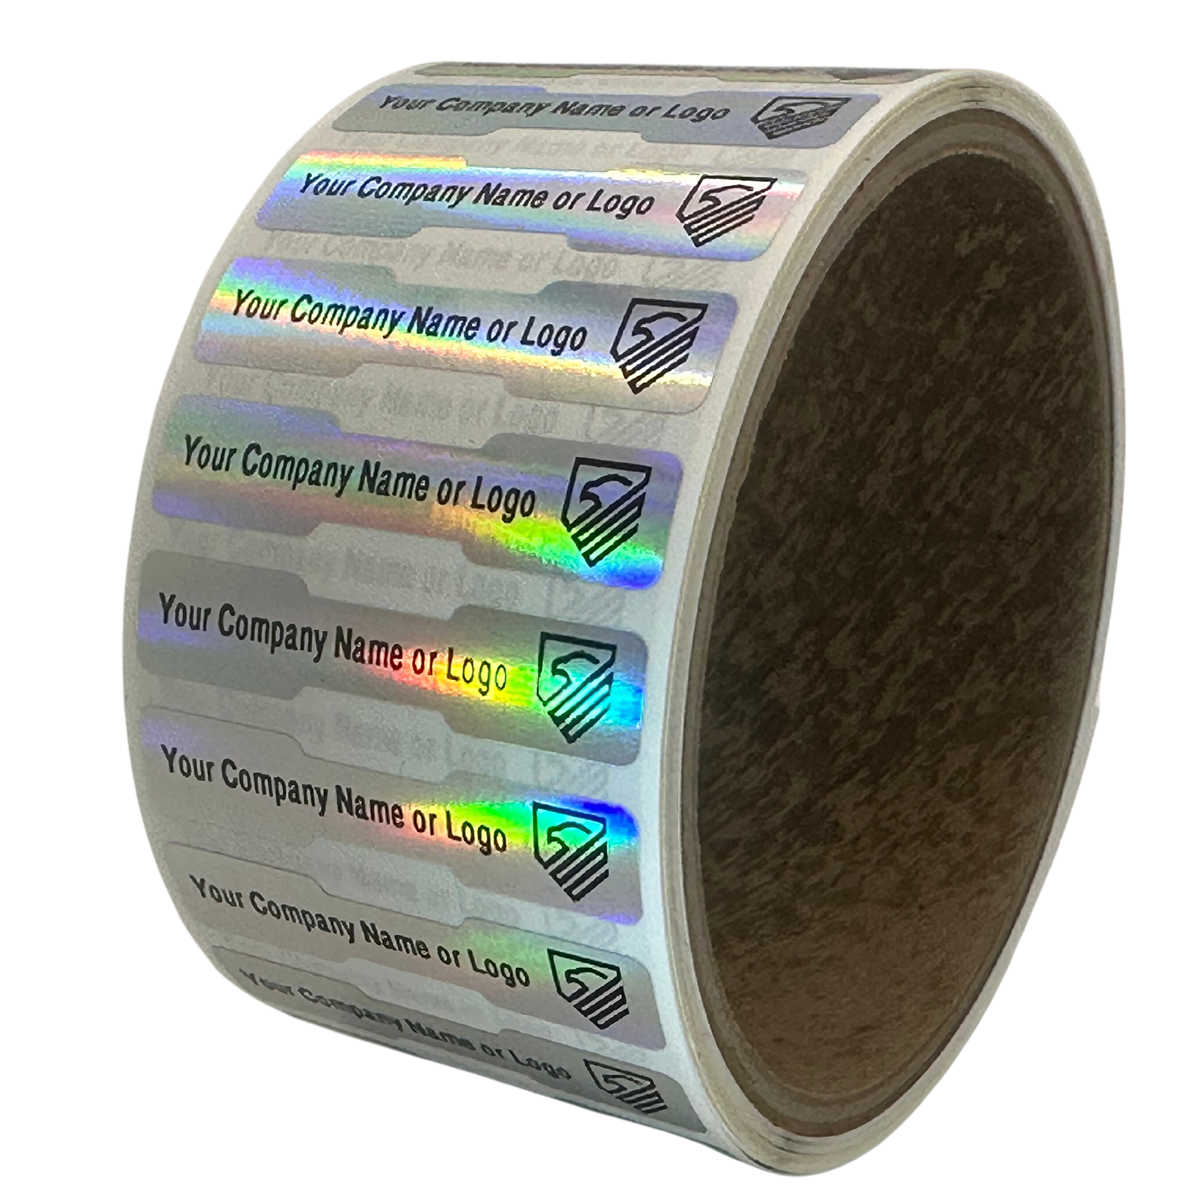 5,000 TamperColor Holographic Rainbow Color/ Finish Custom Printed Security Labels: Tamper Evident, Dogbone Shape Size 1.75" x 0.375 (44mm x 9mm) >Click on item details to customize.